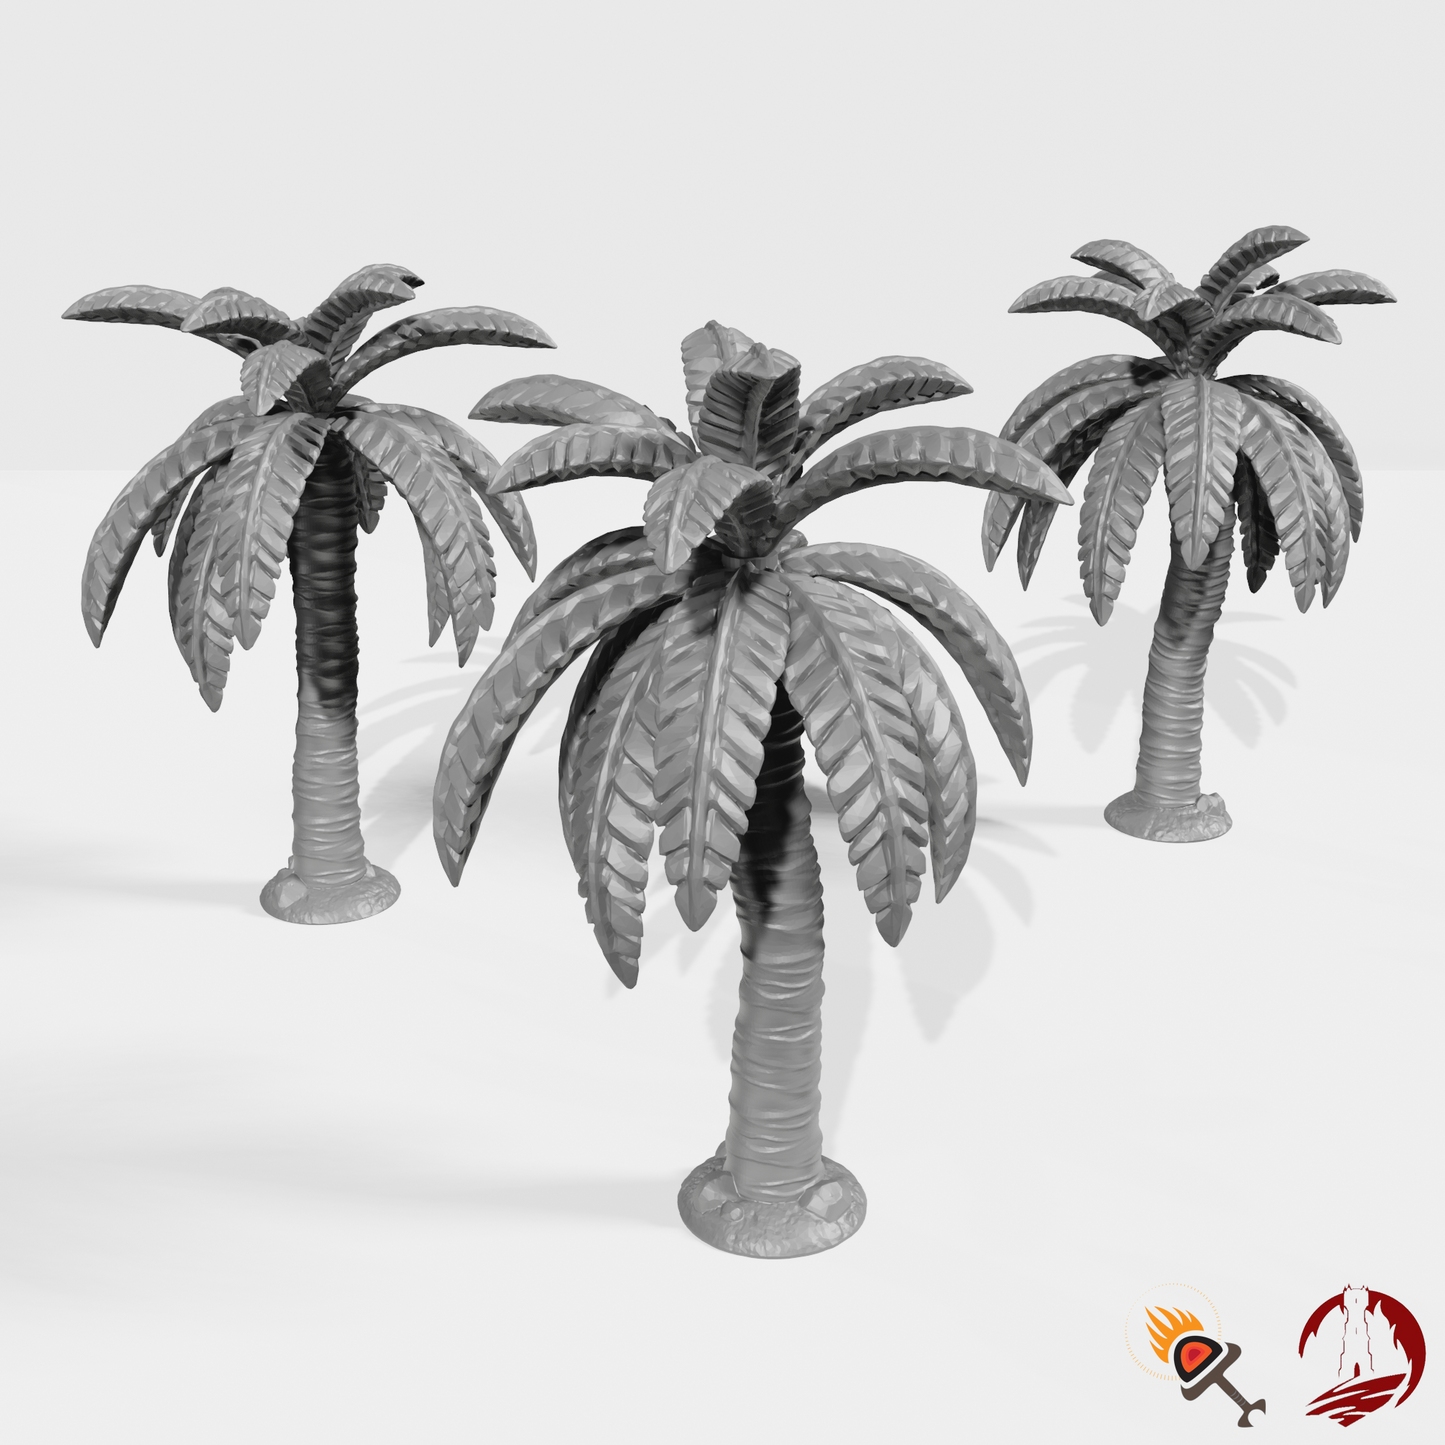 Miniature Palm Trees 15mm 28mm 32mm for D&D Terrain, DnD Pirate Cove, Pathfinder Coastal Tribal, Tropical Island Diorama, Blood and Plunder